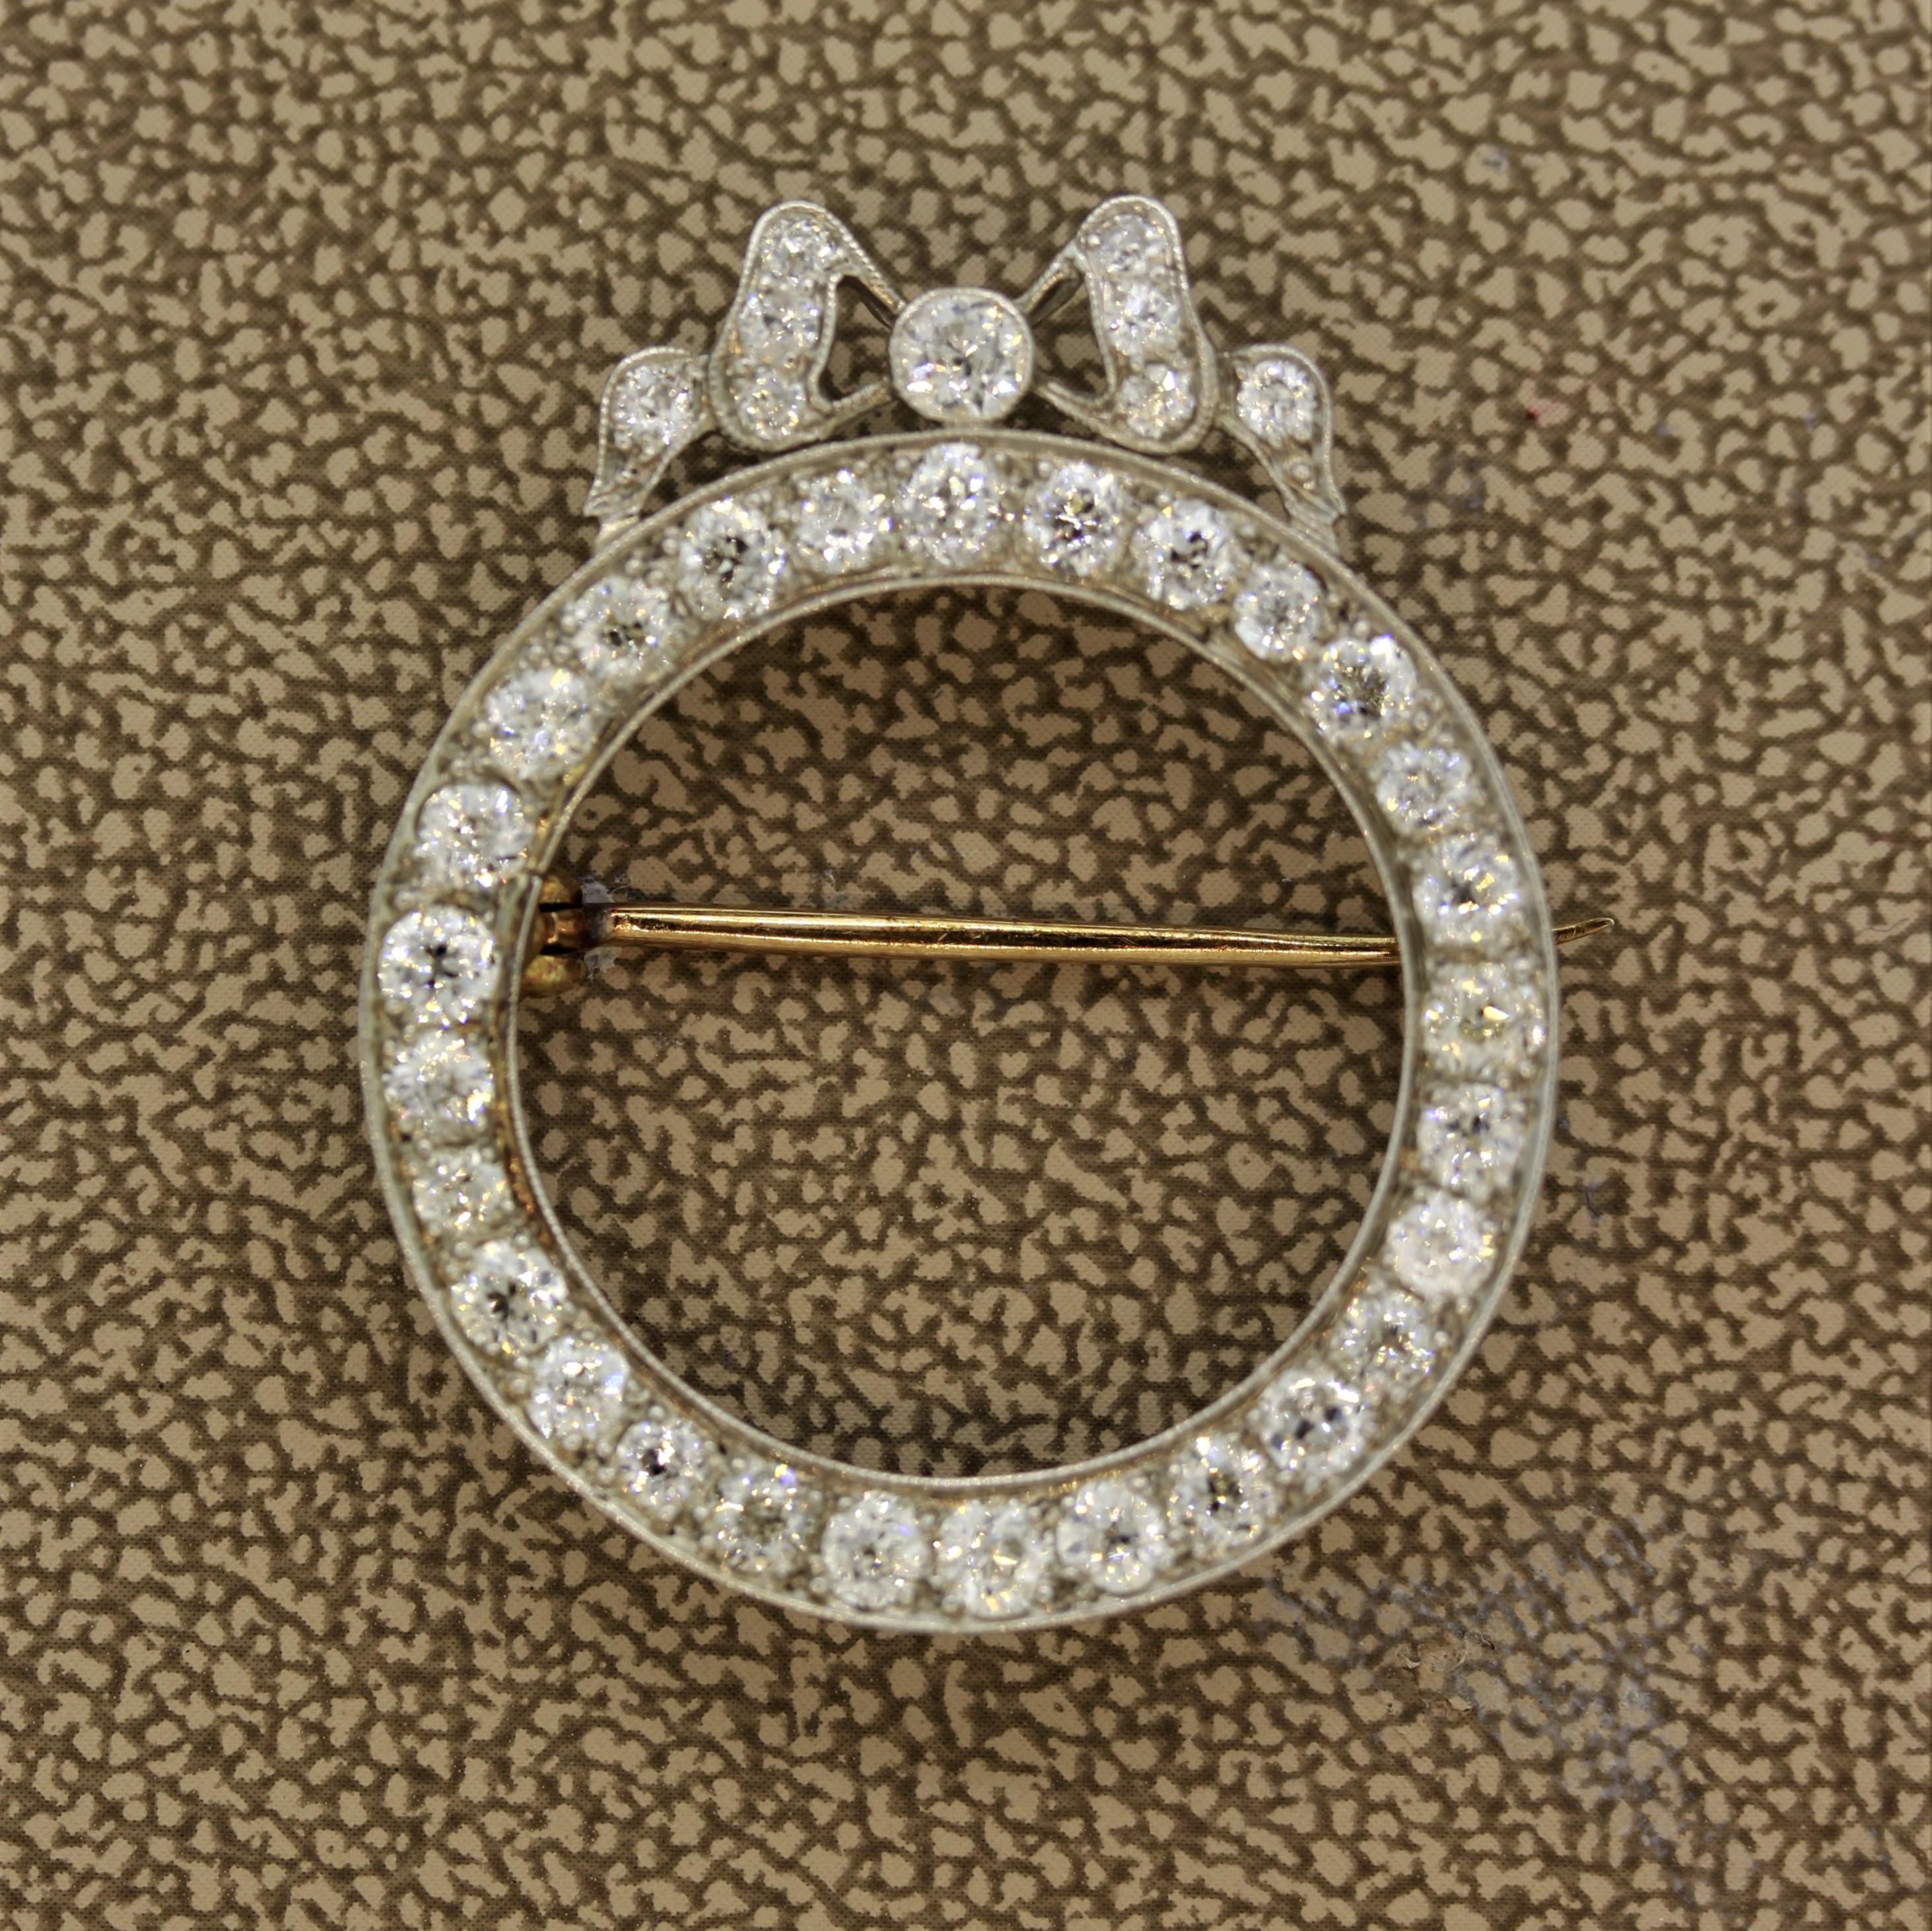 A sweet and finely made classic Edwardian piece of jewelry, circa 1905. It features 3 carats of round European cut diamonds set around in a circle as well as in a fine bow on top of the brooch. The borders of the piece are finished with a soft